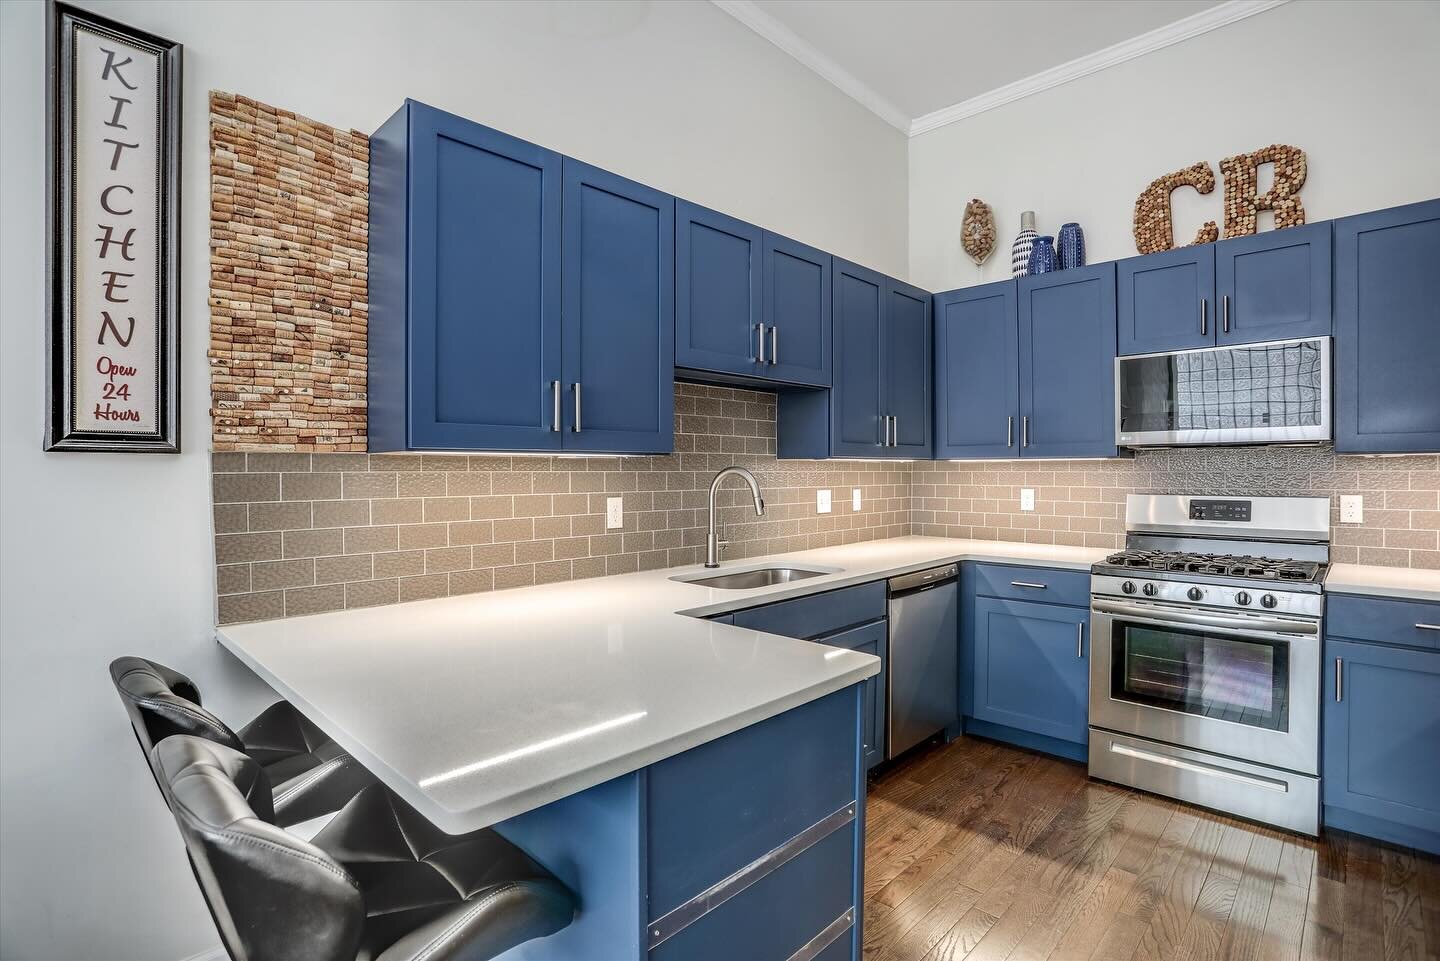 JOIN ME at 📍443 E Milwaukee TOMORROW 4/5 from 11:30am-1:30pm at our OPEN HOUSE! Whether you&rsquo;re already a 🌃 city dweller 👀 looking for your next spot ORRR if you&rsquo;re coming from the burbs 🏡 and looking for that perfect slice of urban pa